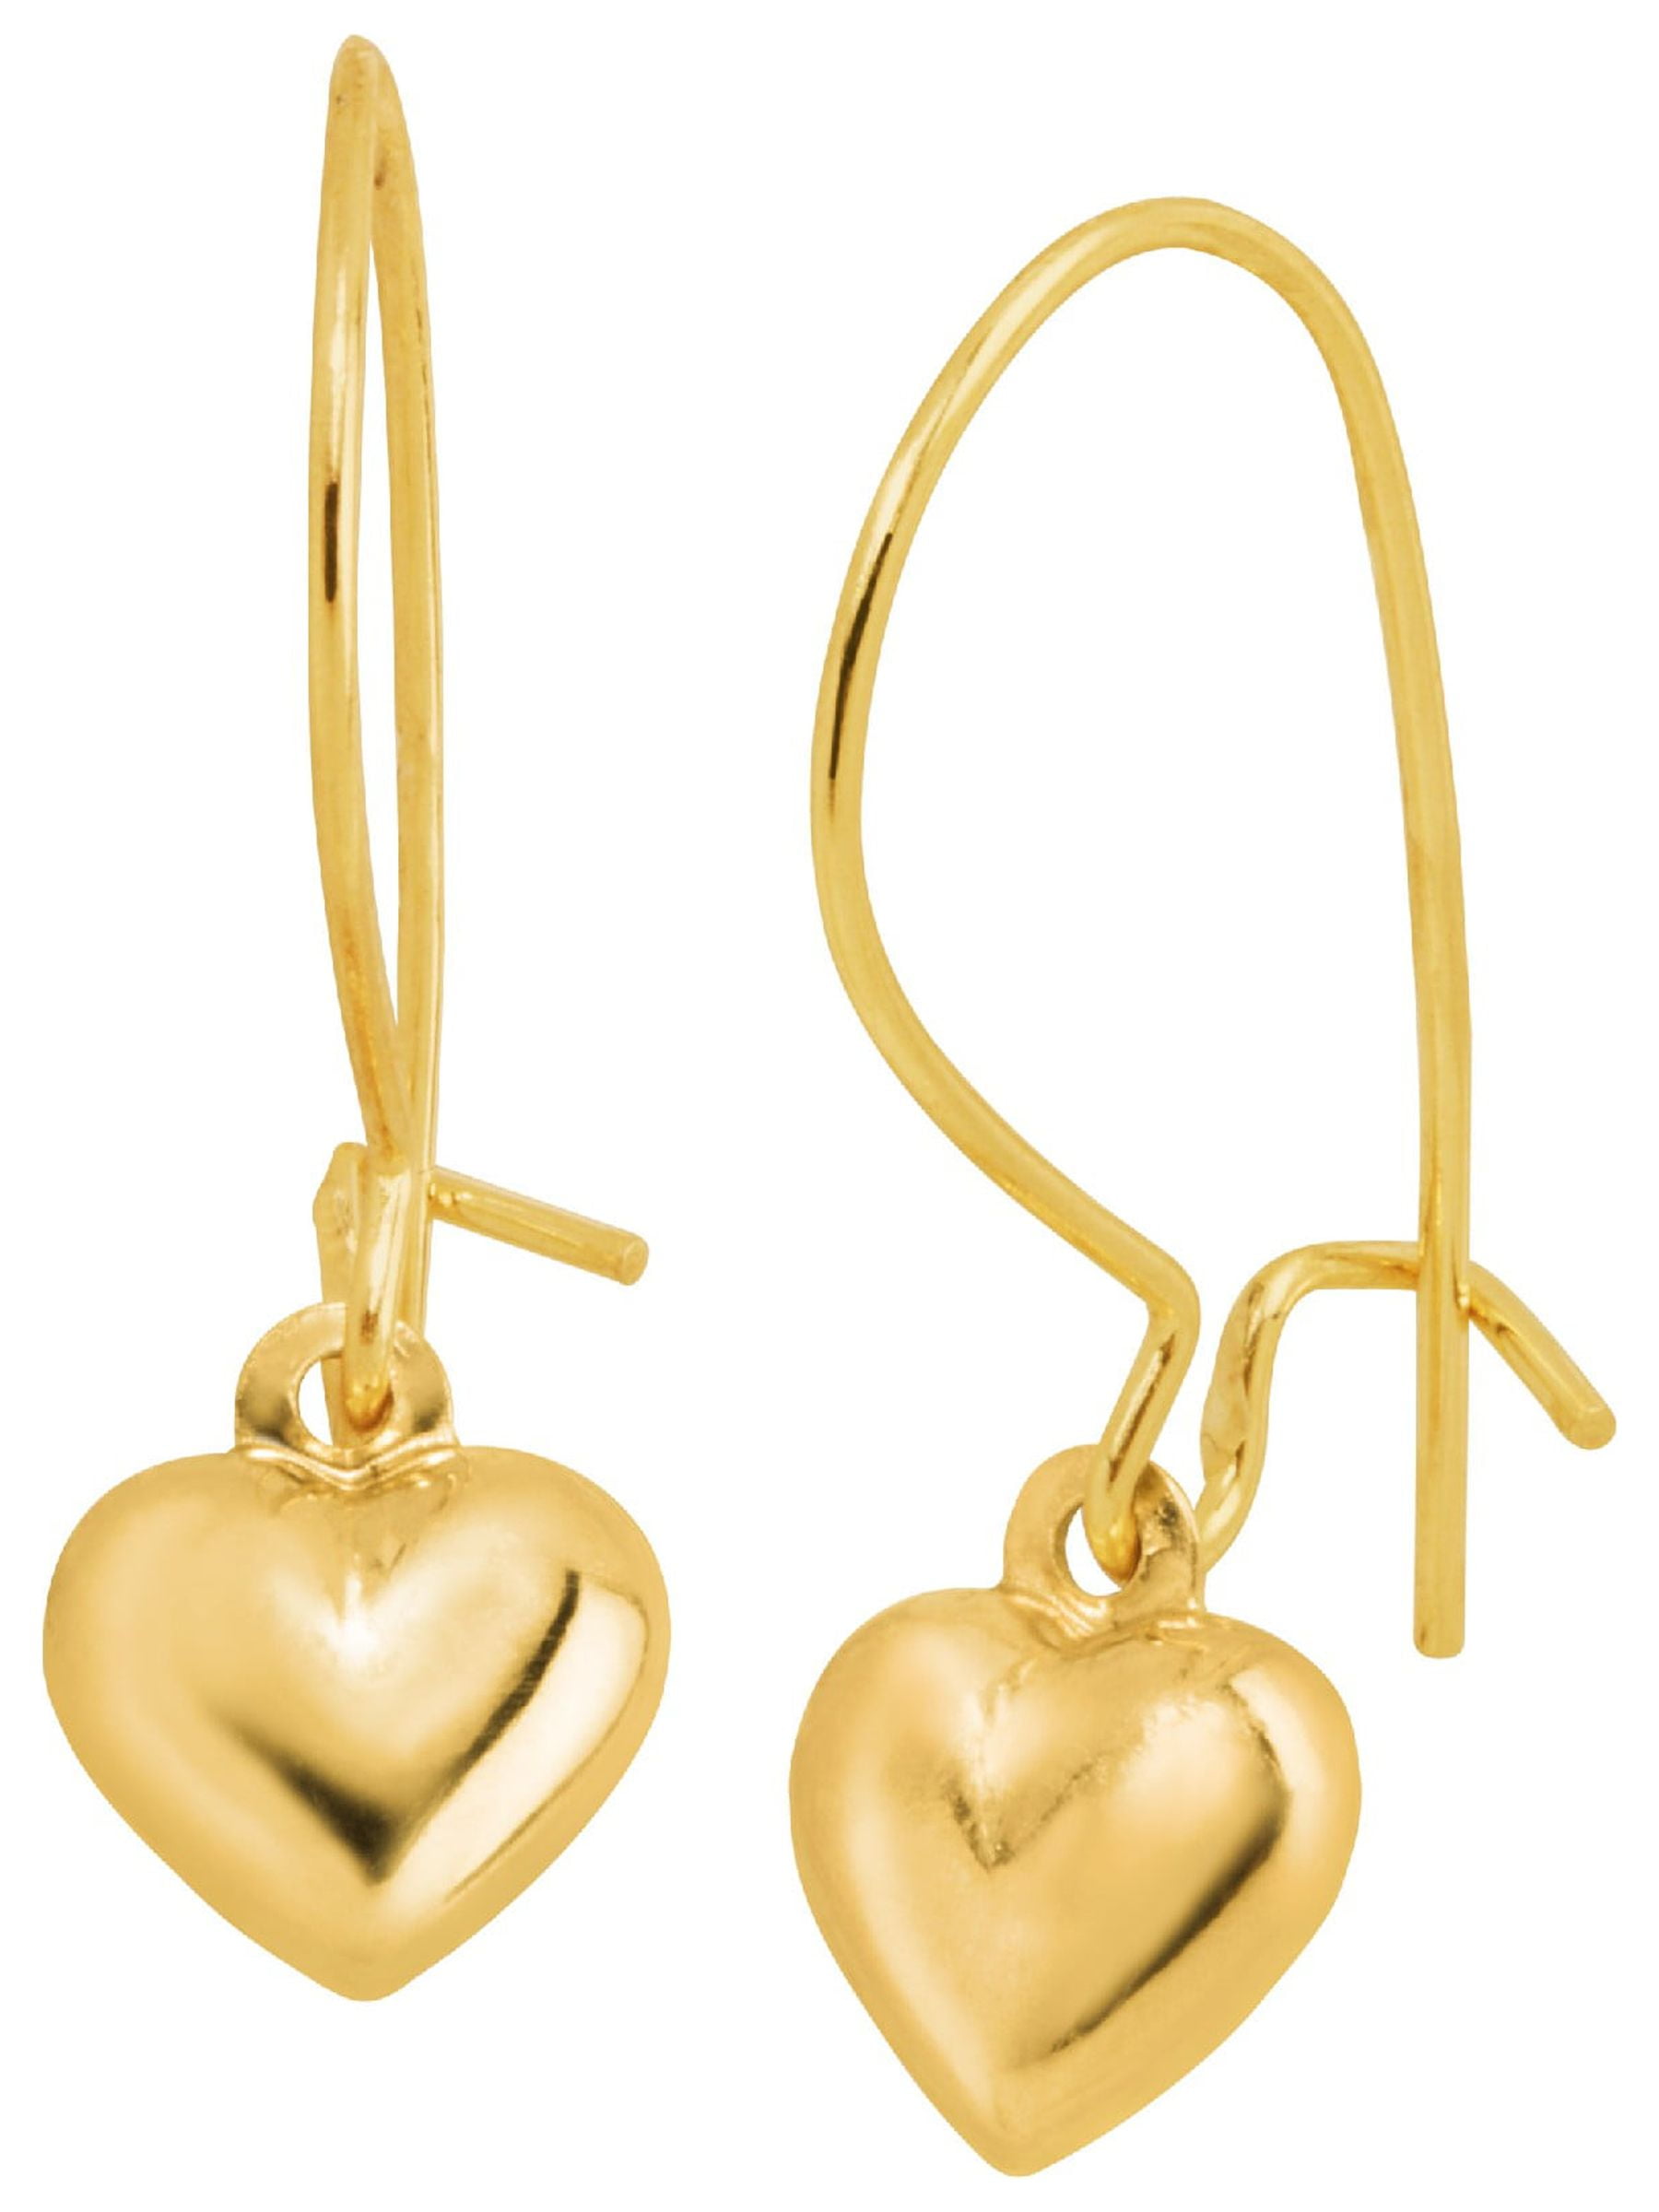 Gold-Tone French Hook Dangle Earrings With Heart Designs TME805